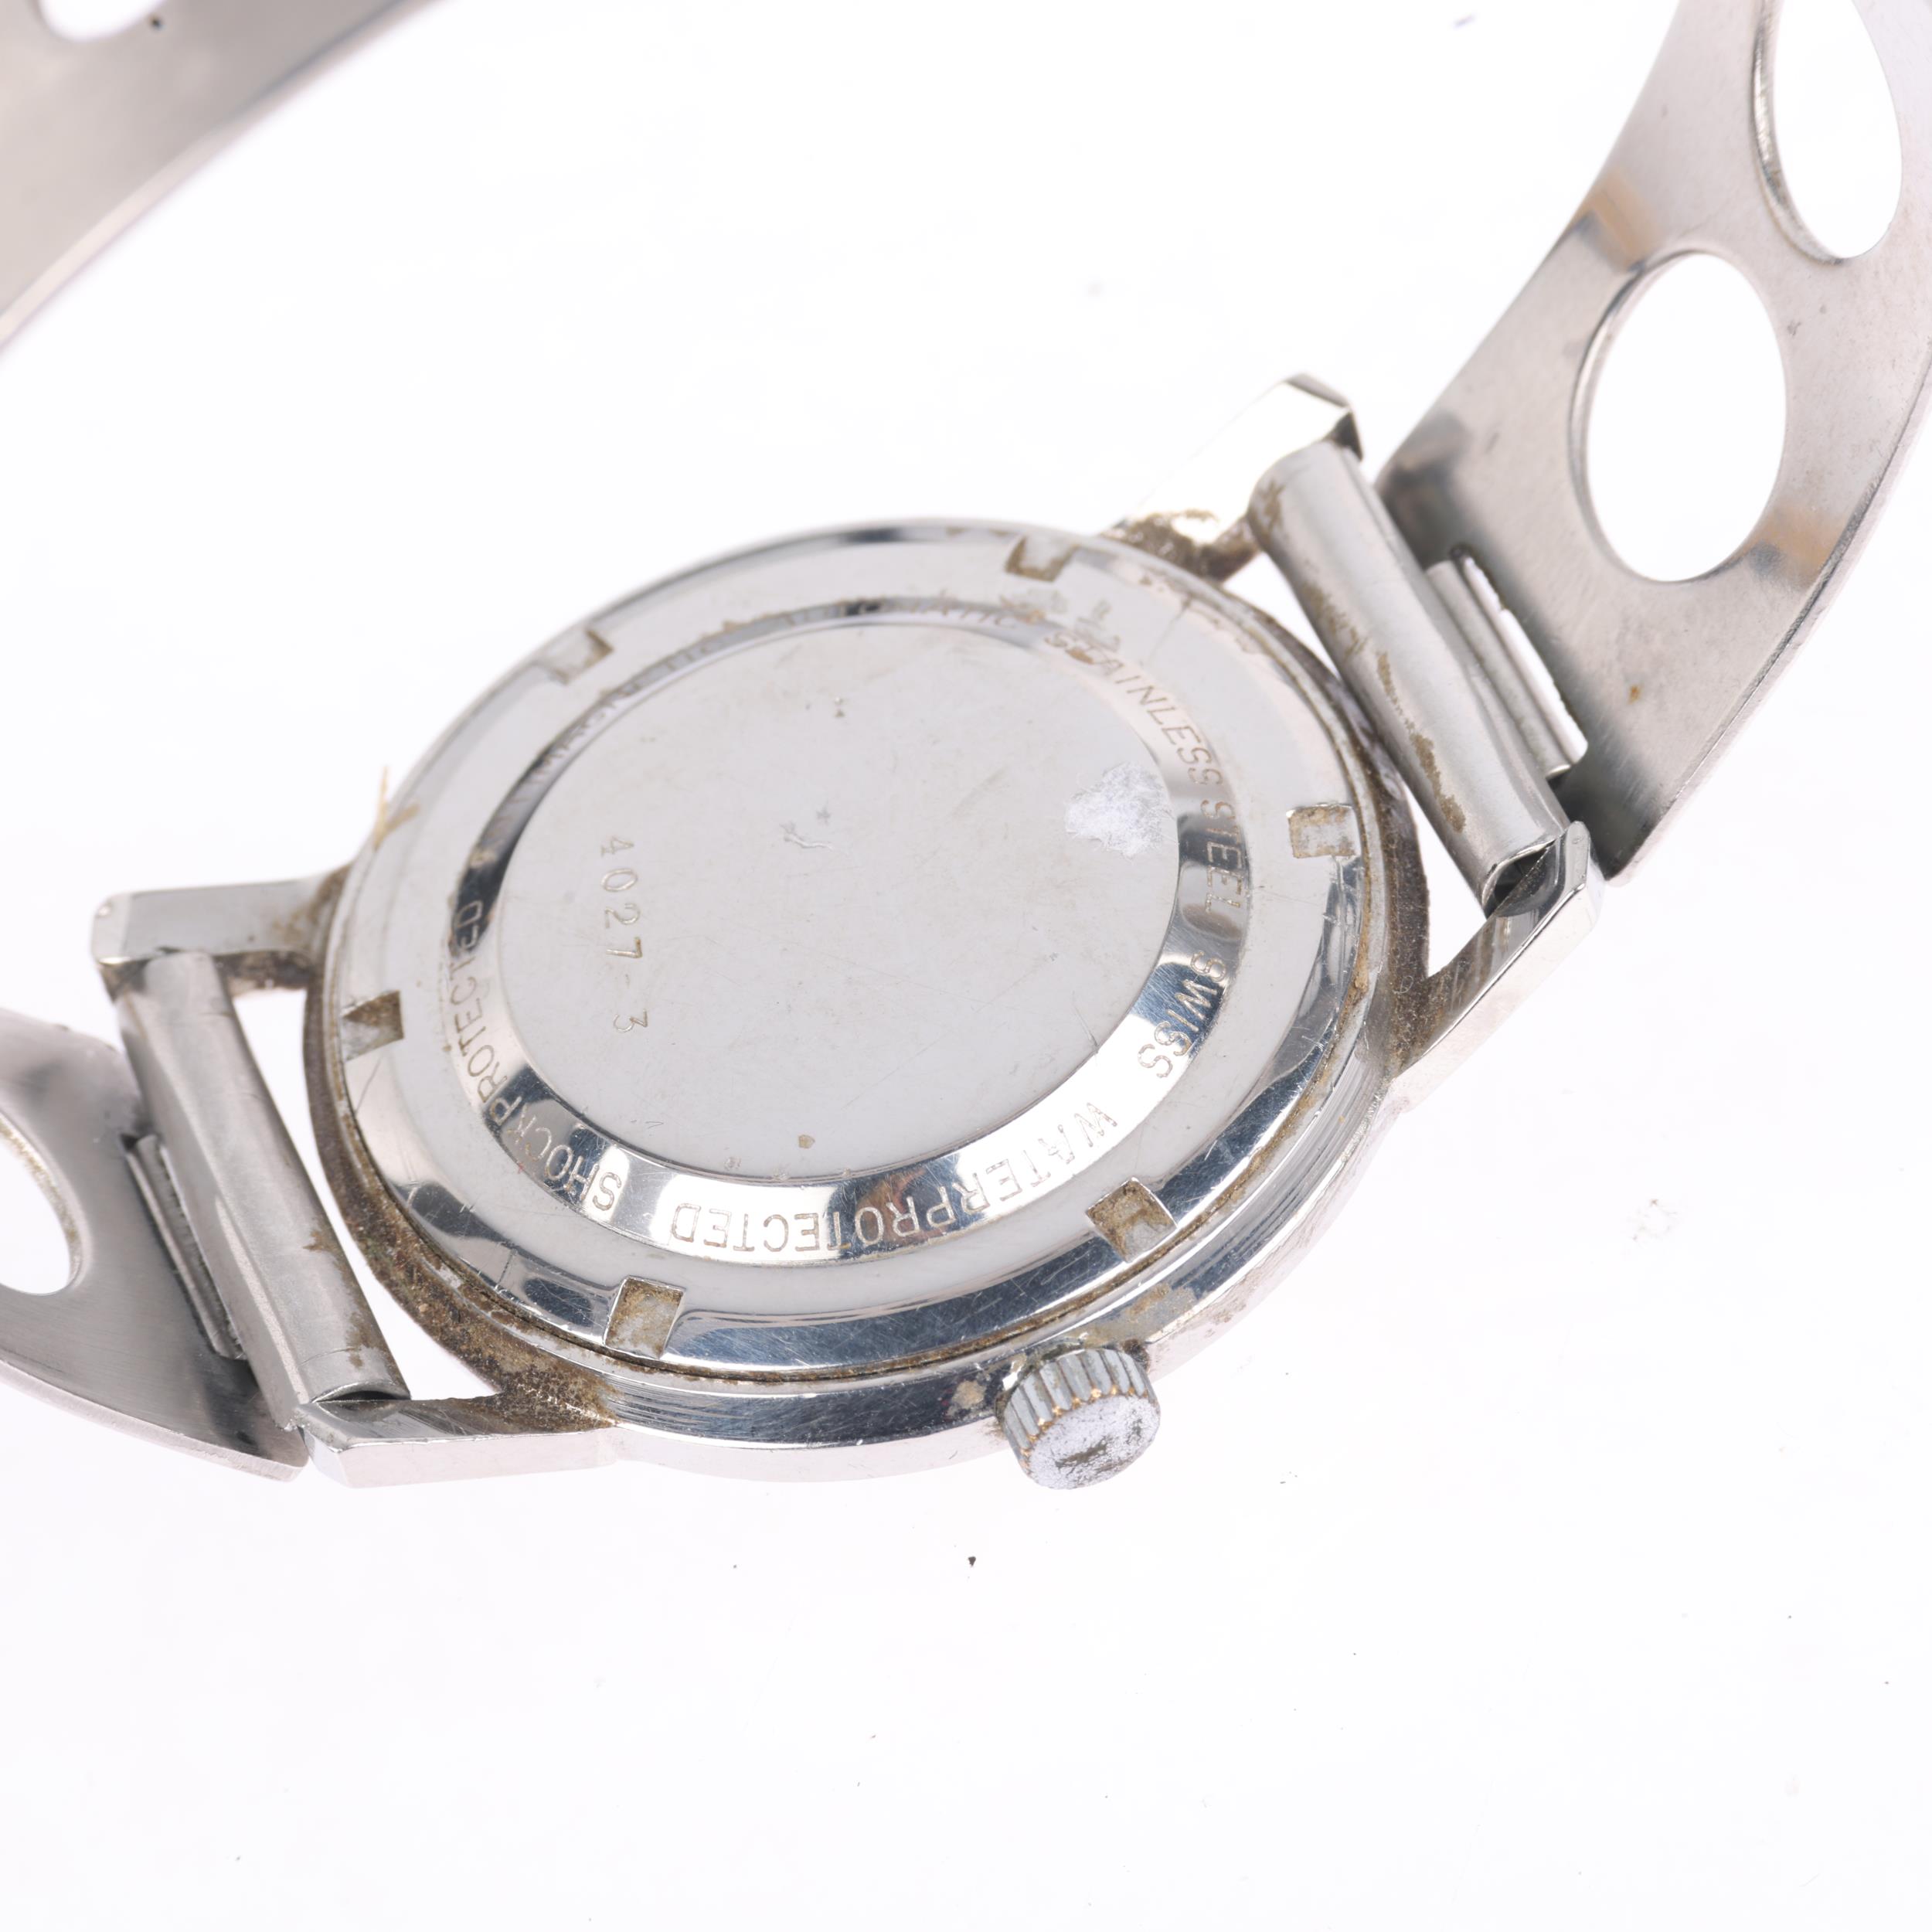 HAMILTON - a Vintage stainless steel automatic calendar wristwatch, ref. 4027-3, circa 1970s, - Image 4 of 5